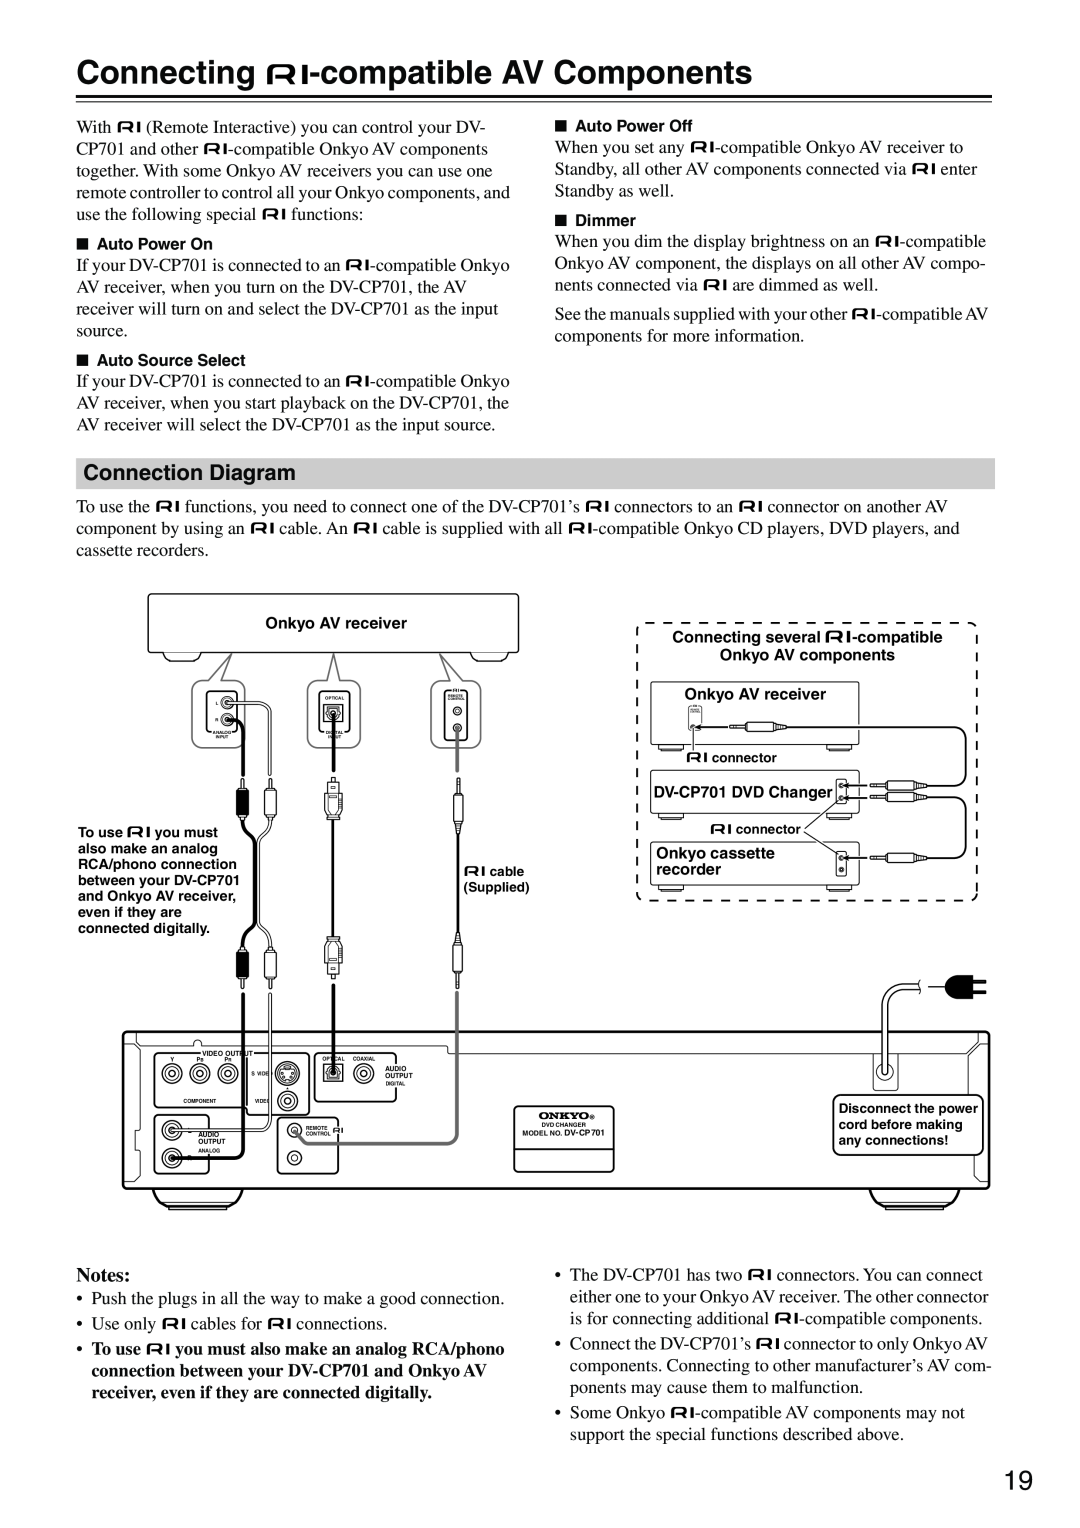 Onkyo DV-CP701 instruction manual Connecting -compatibleAV Components, Connection Diagram, Notes 